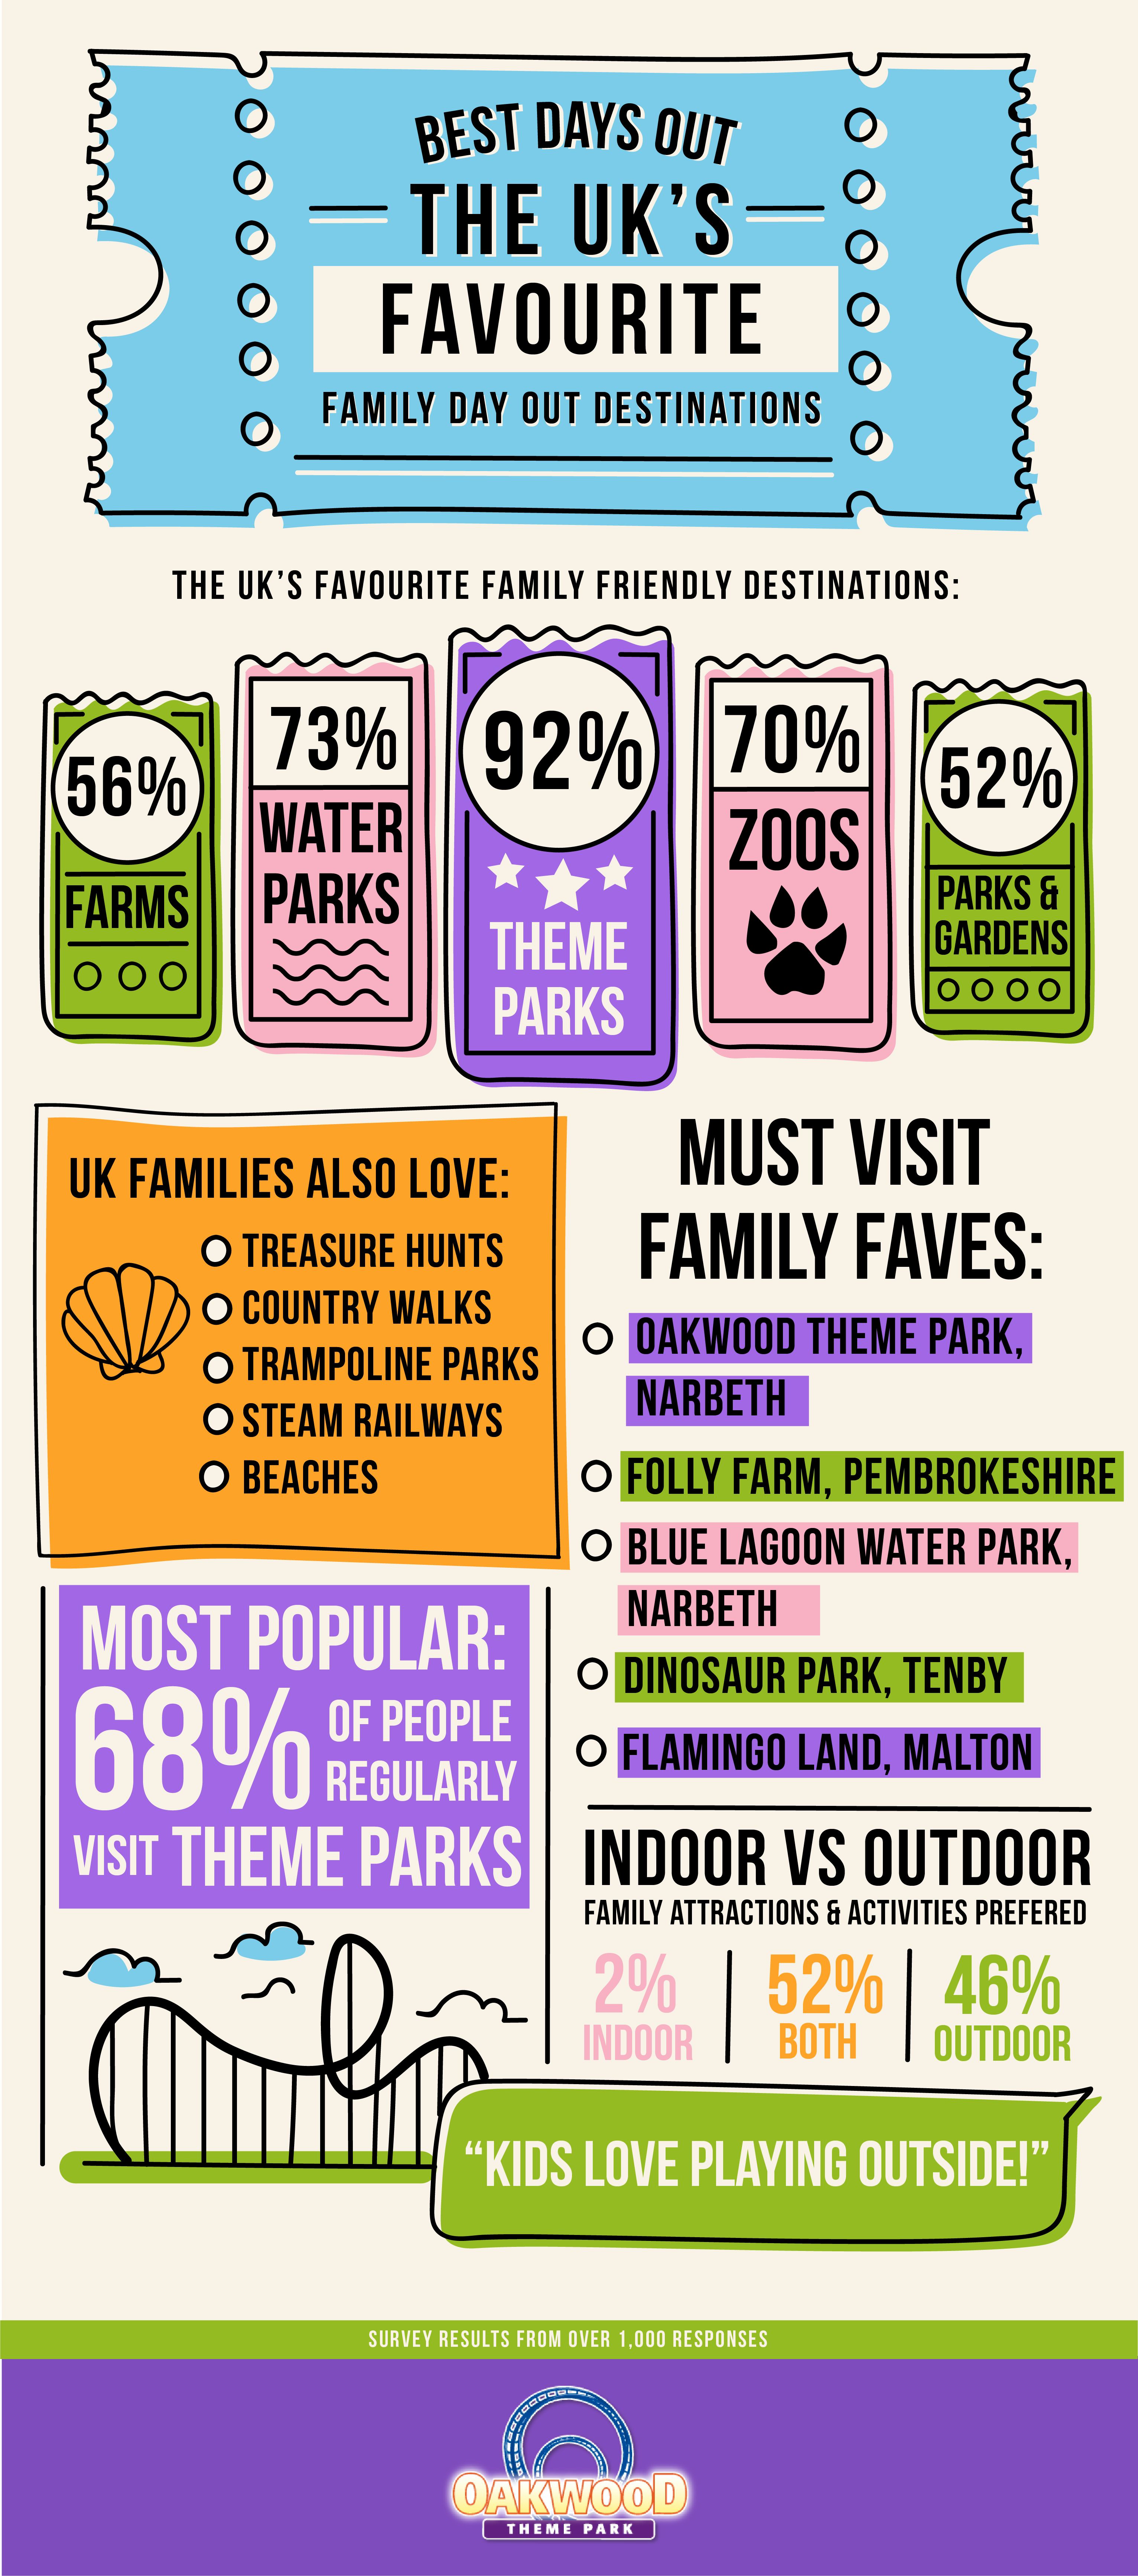 Best Days Out Infographic